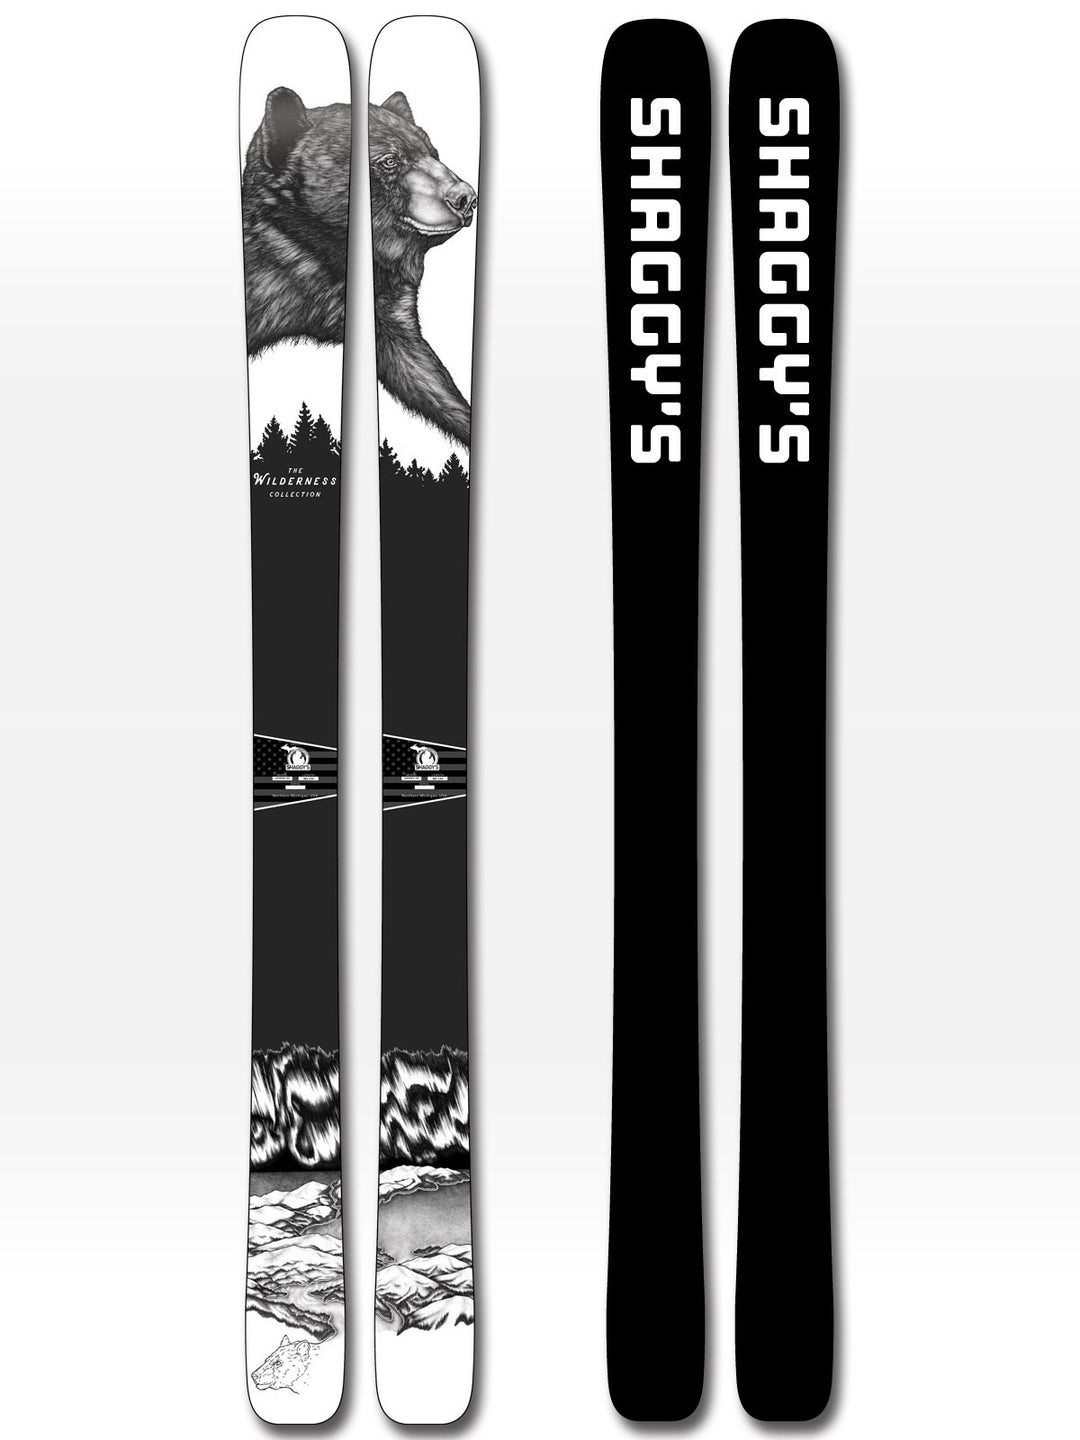 Limited Edition Wilderness Collection Skis